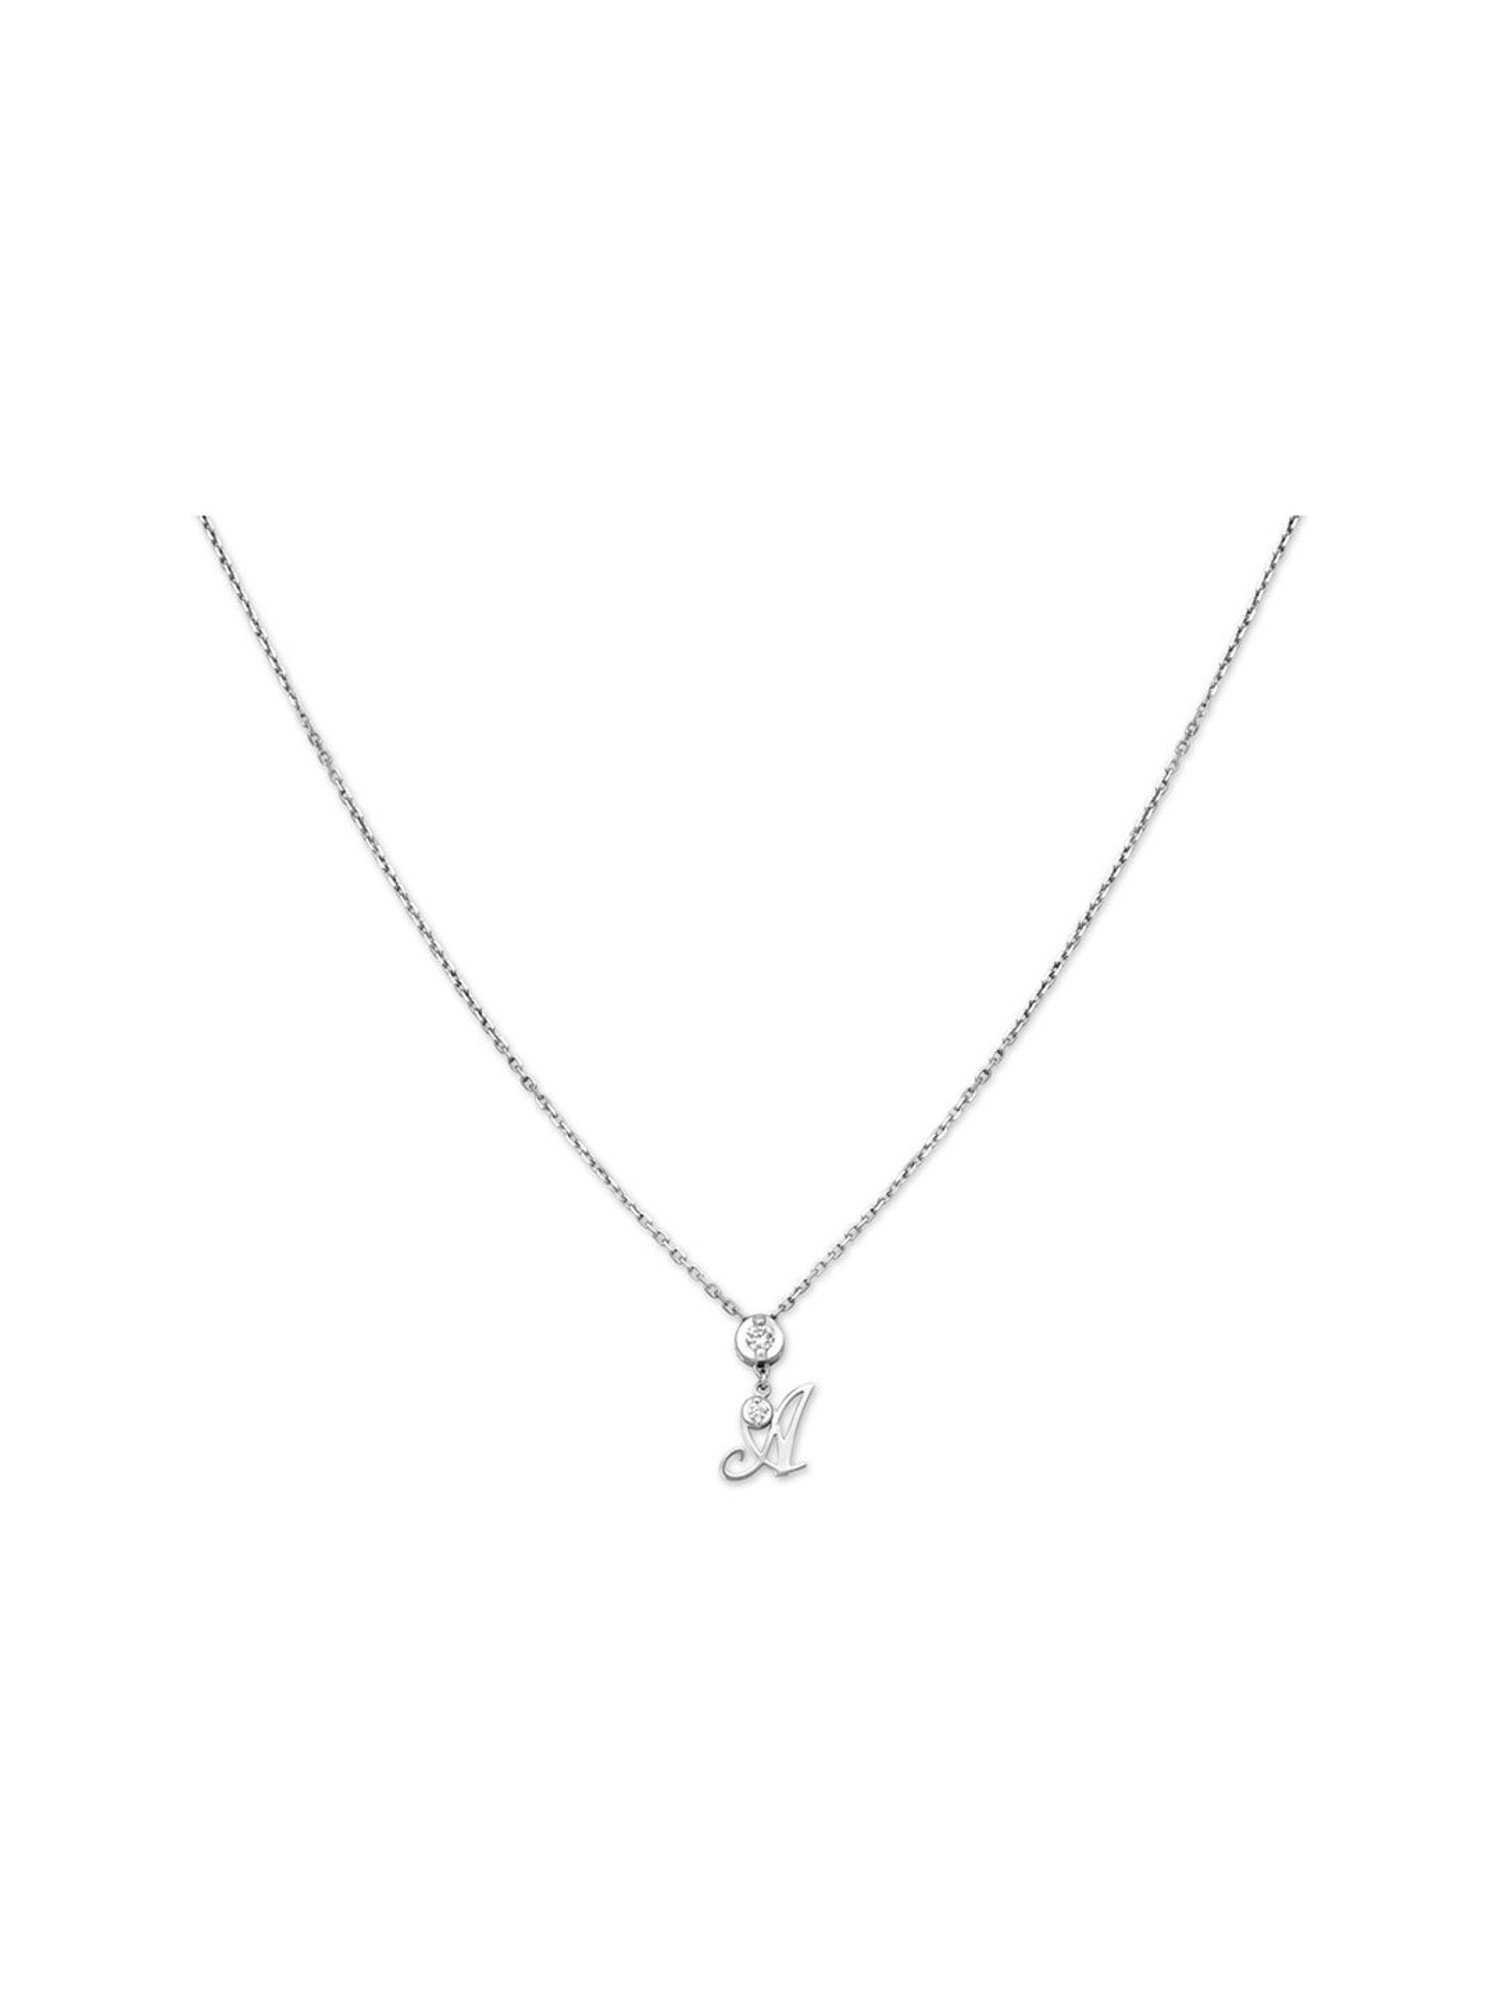 Two By London TWO by London 18k Small Diamond Heart Pendant Necklace London  Jewelers Bridal Boutique